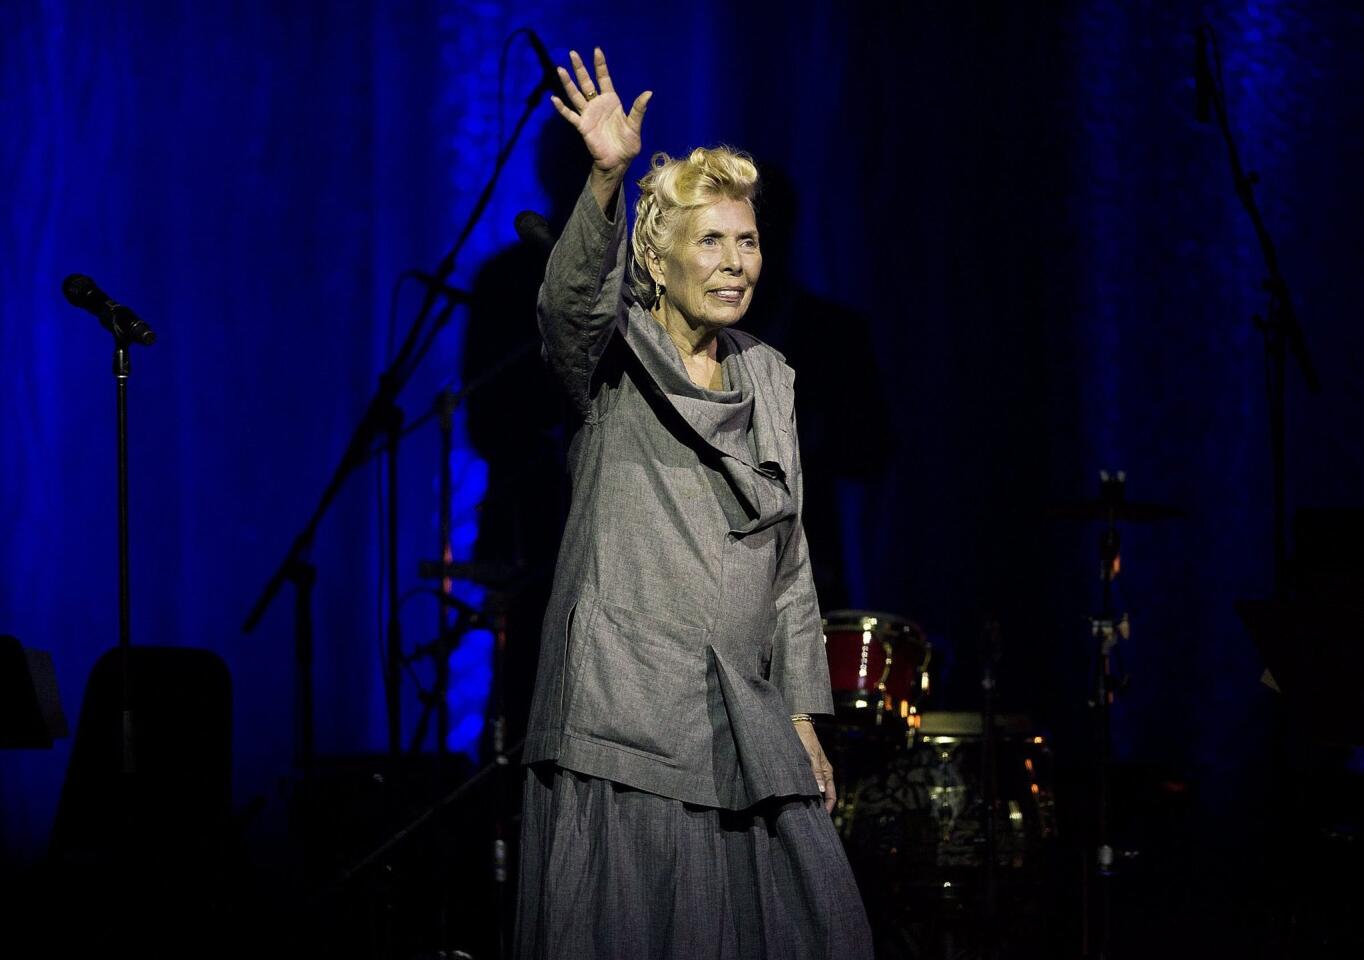 Joni Mitchell waves to the crowd during her 70th birthday tribute concert as part of the Luminato Festival at Massey Hall in Toronto.